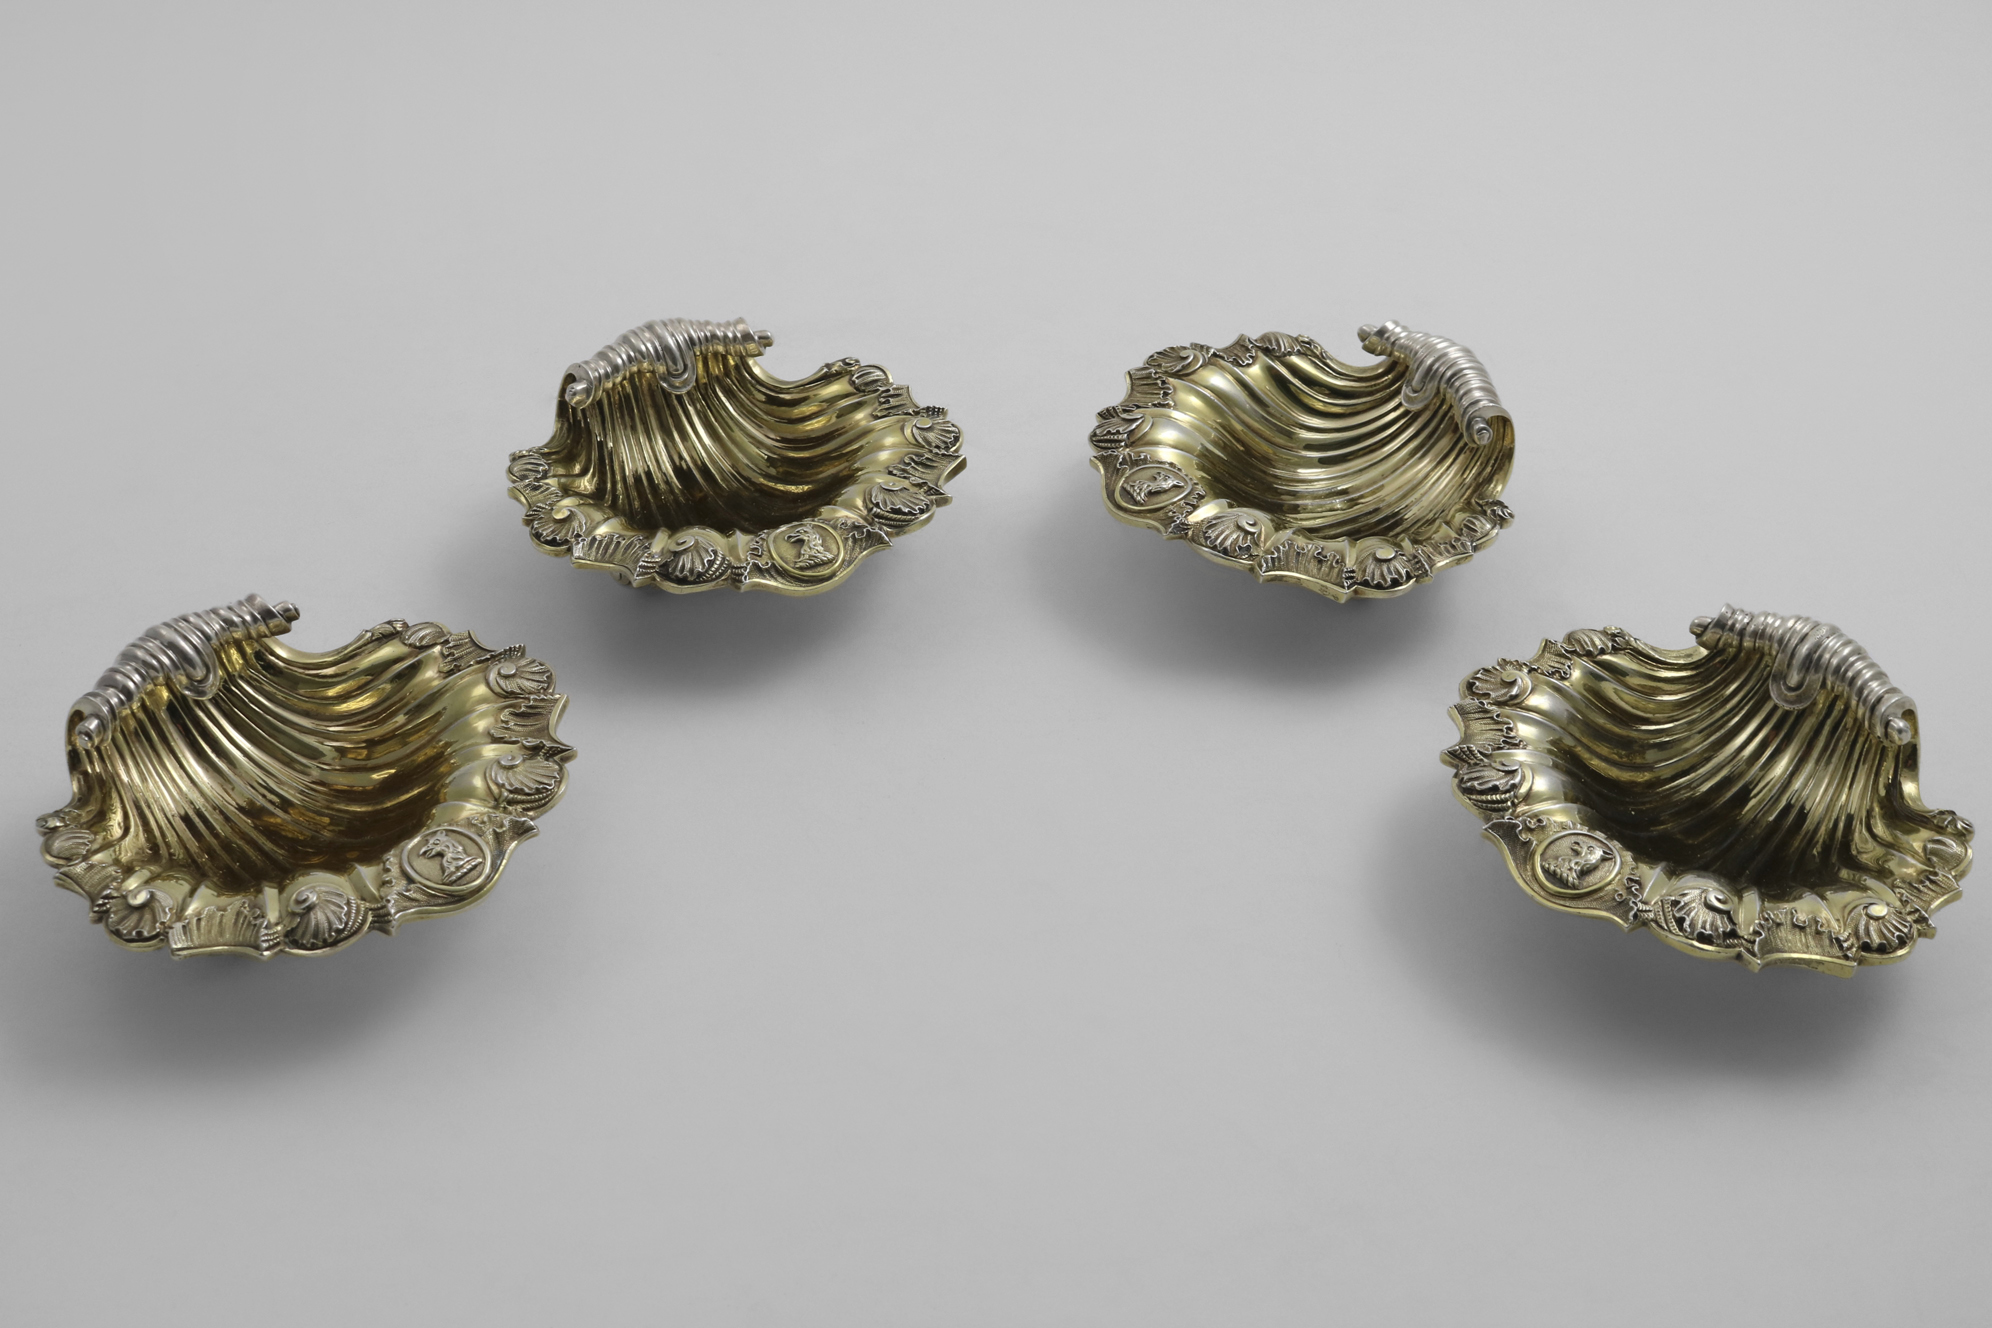 A SET OF FOUR EARLY VICTORIAN CAST SCALLOP SHELL SALTS with a chased border around the rim